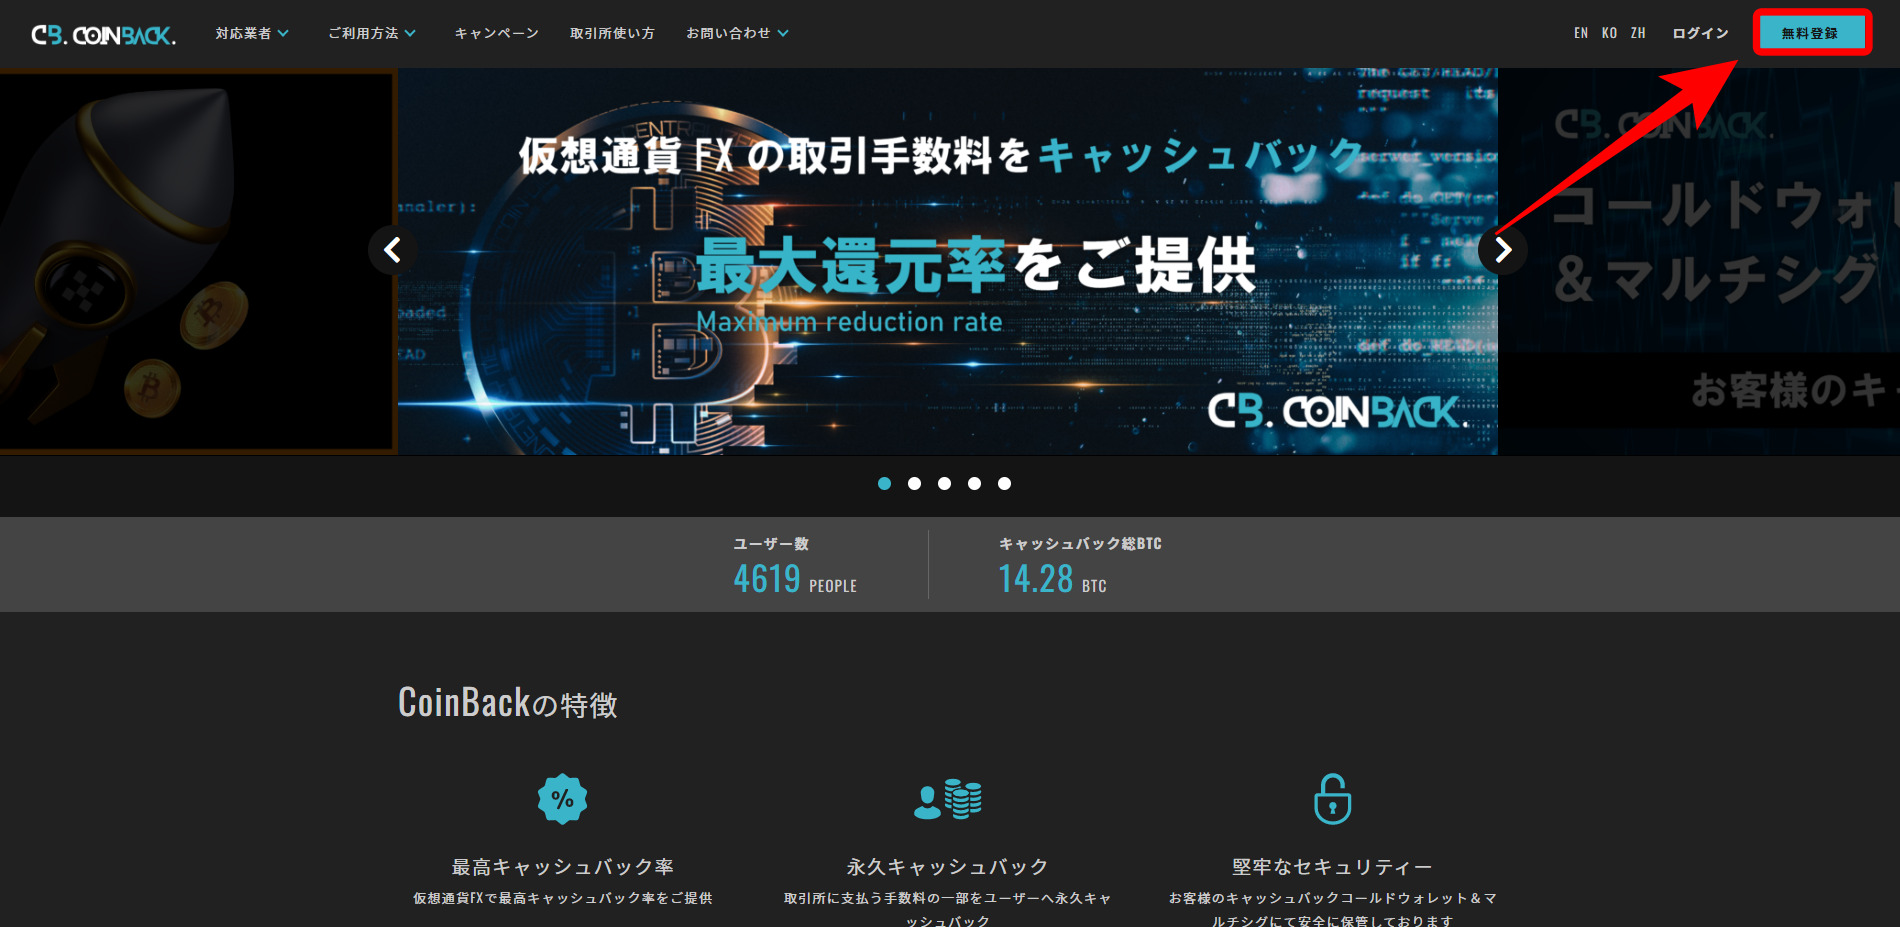 CoinBackに登録